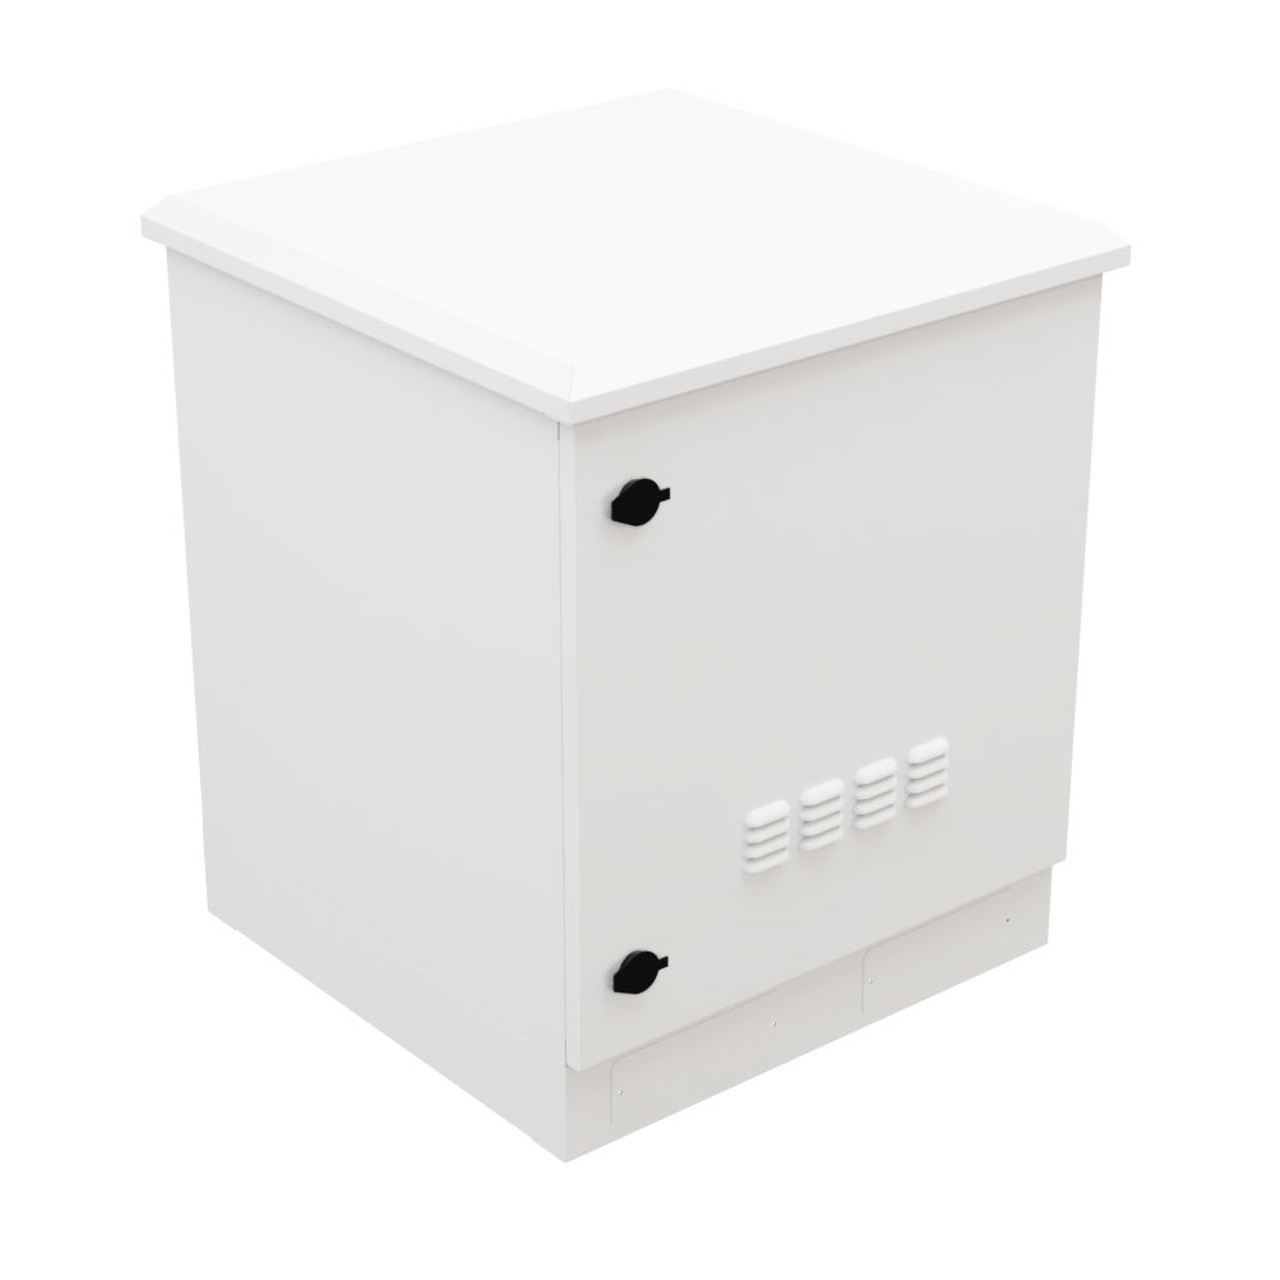 Floor Mount Outdoor Network Cabinet, 12U, Fans with Temperature Control, White, IP66-Rated